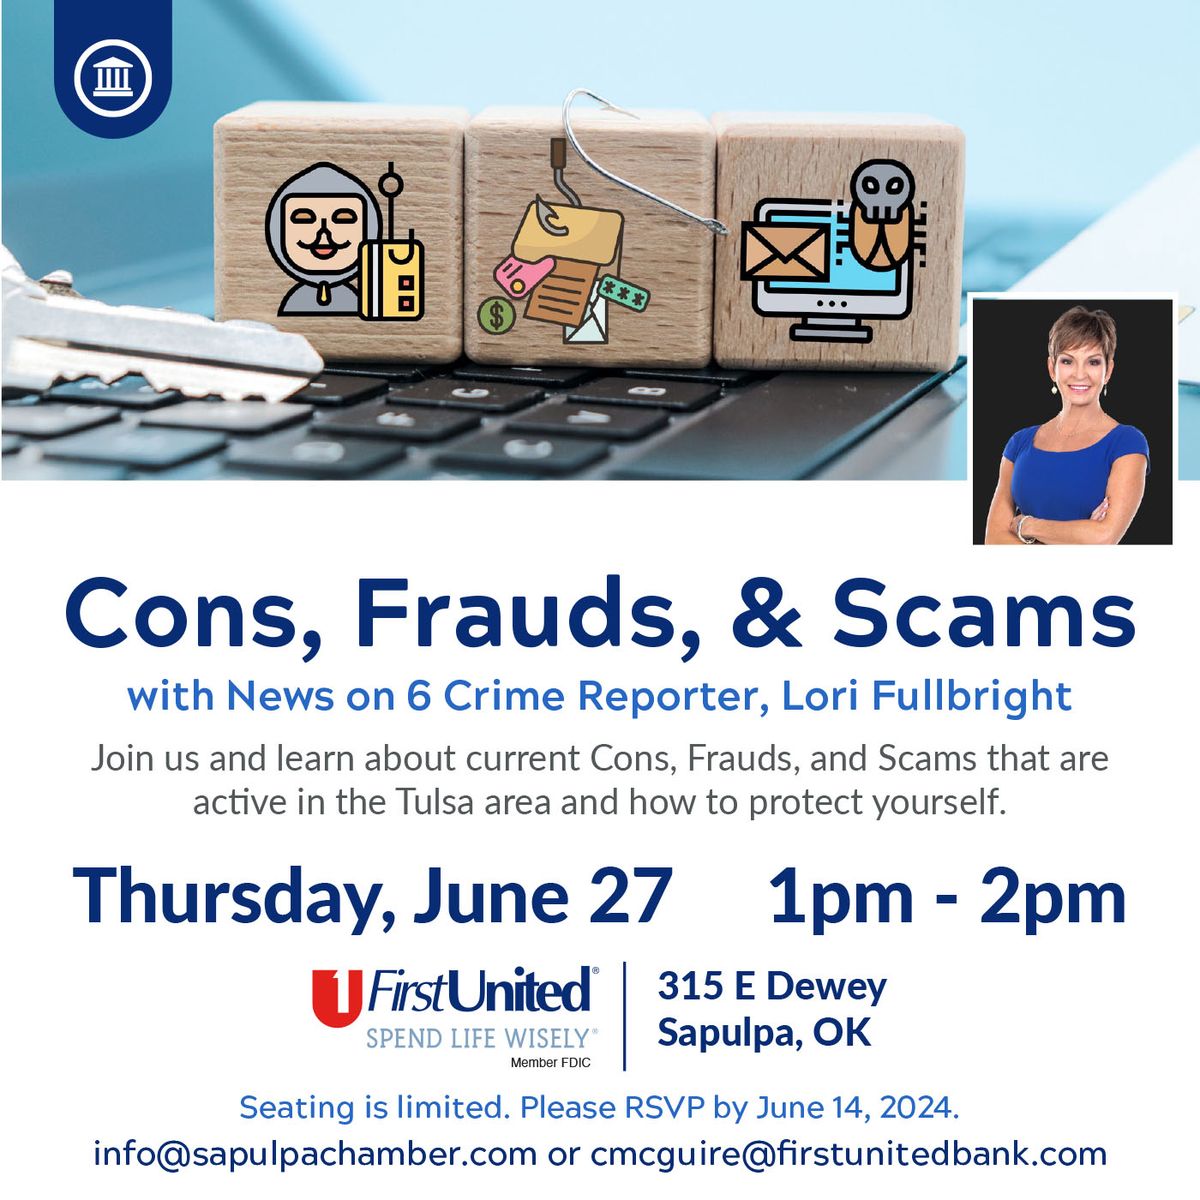 Cons, Frauds, & Scams with Lori Fullbright